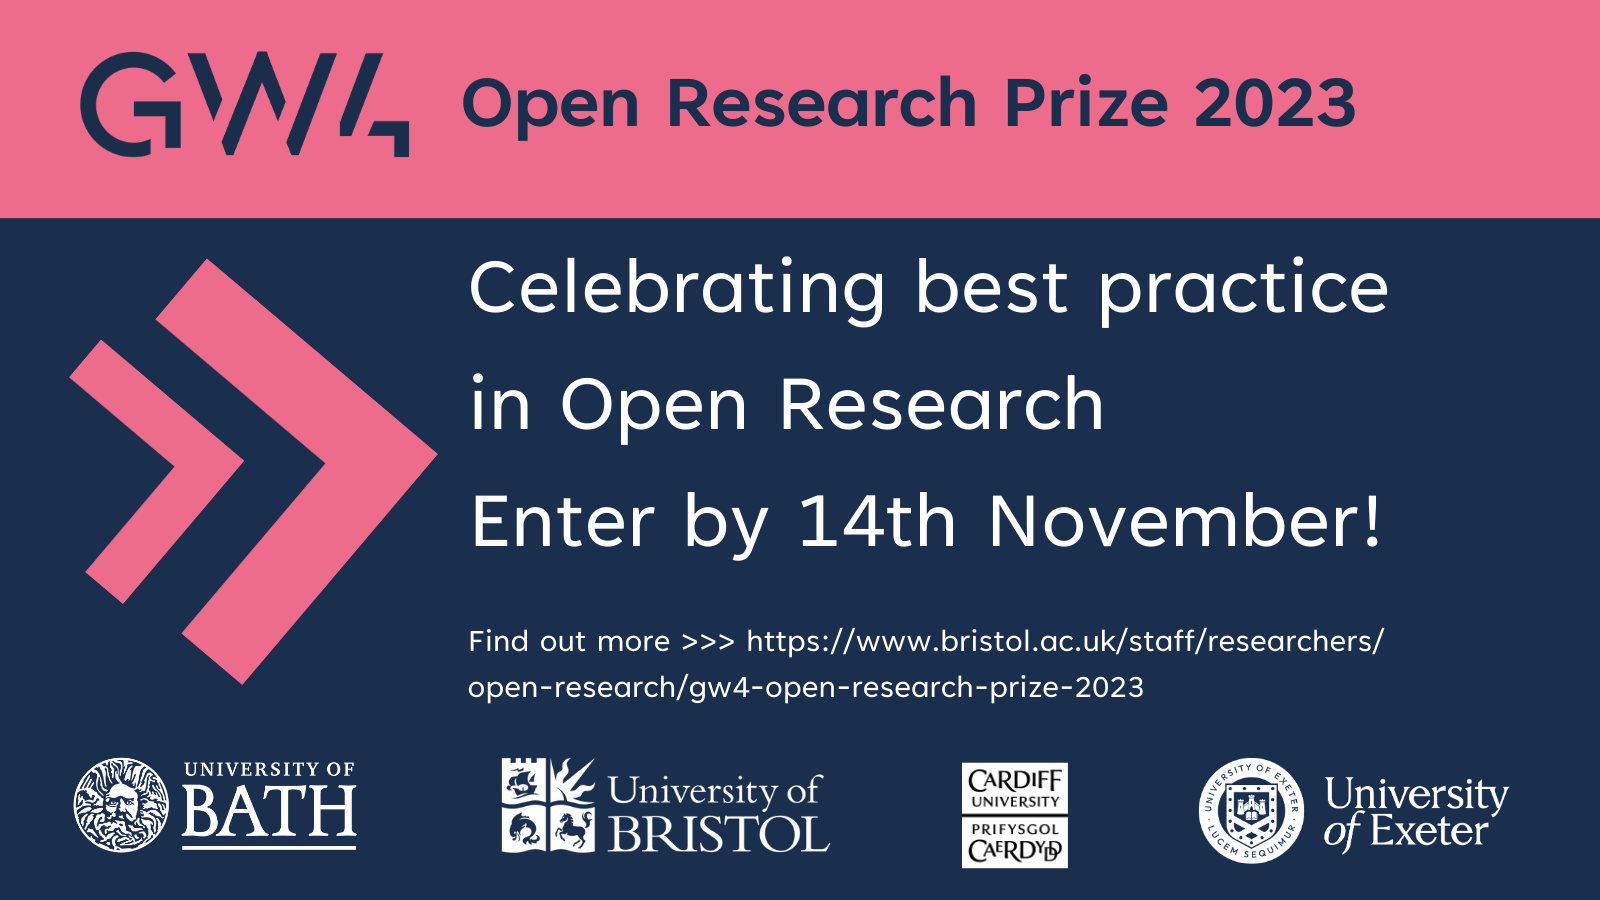 Graphic says: 'GW4 Open Research Prize 2023 - Celebrating Best Practice in Open Research. Enter by 14th November!'